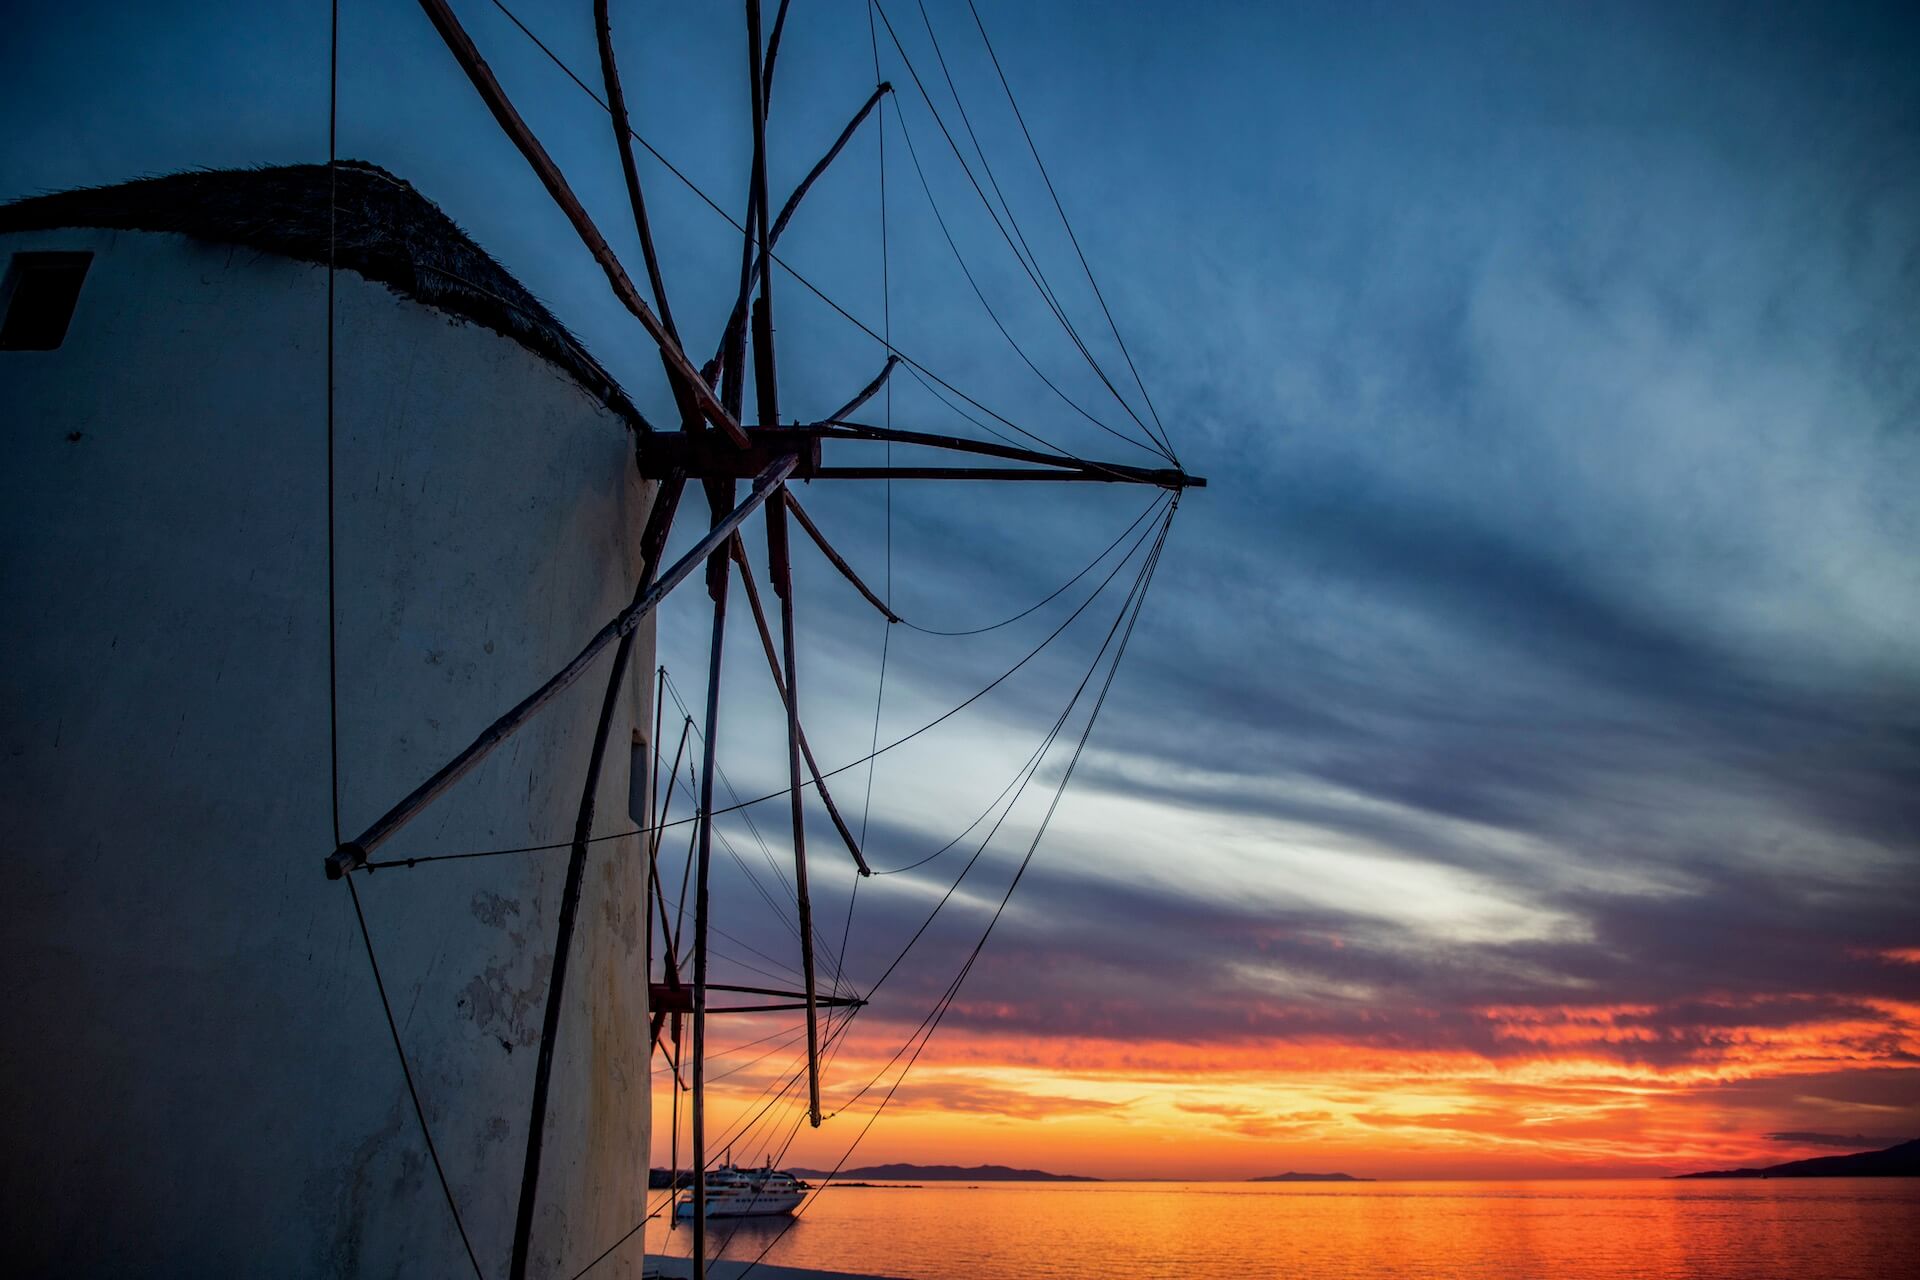 A view of a windmill in sunset